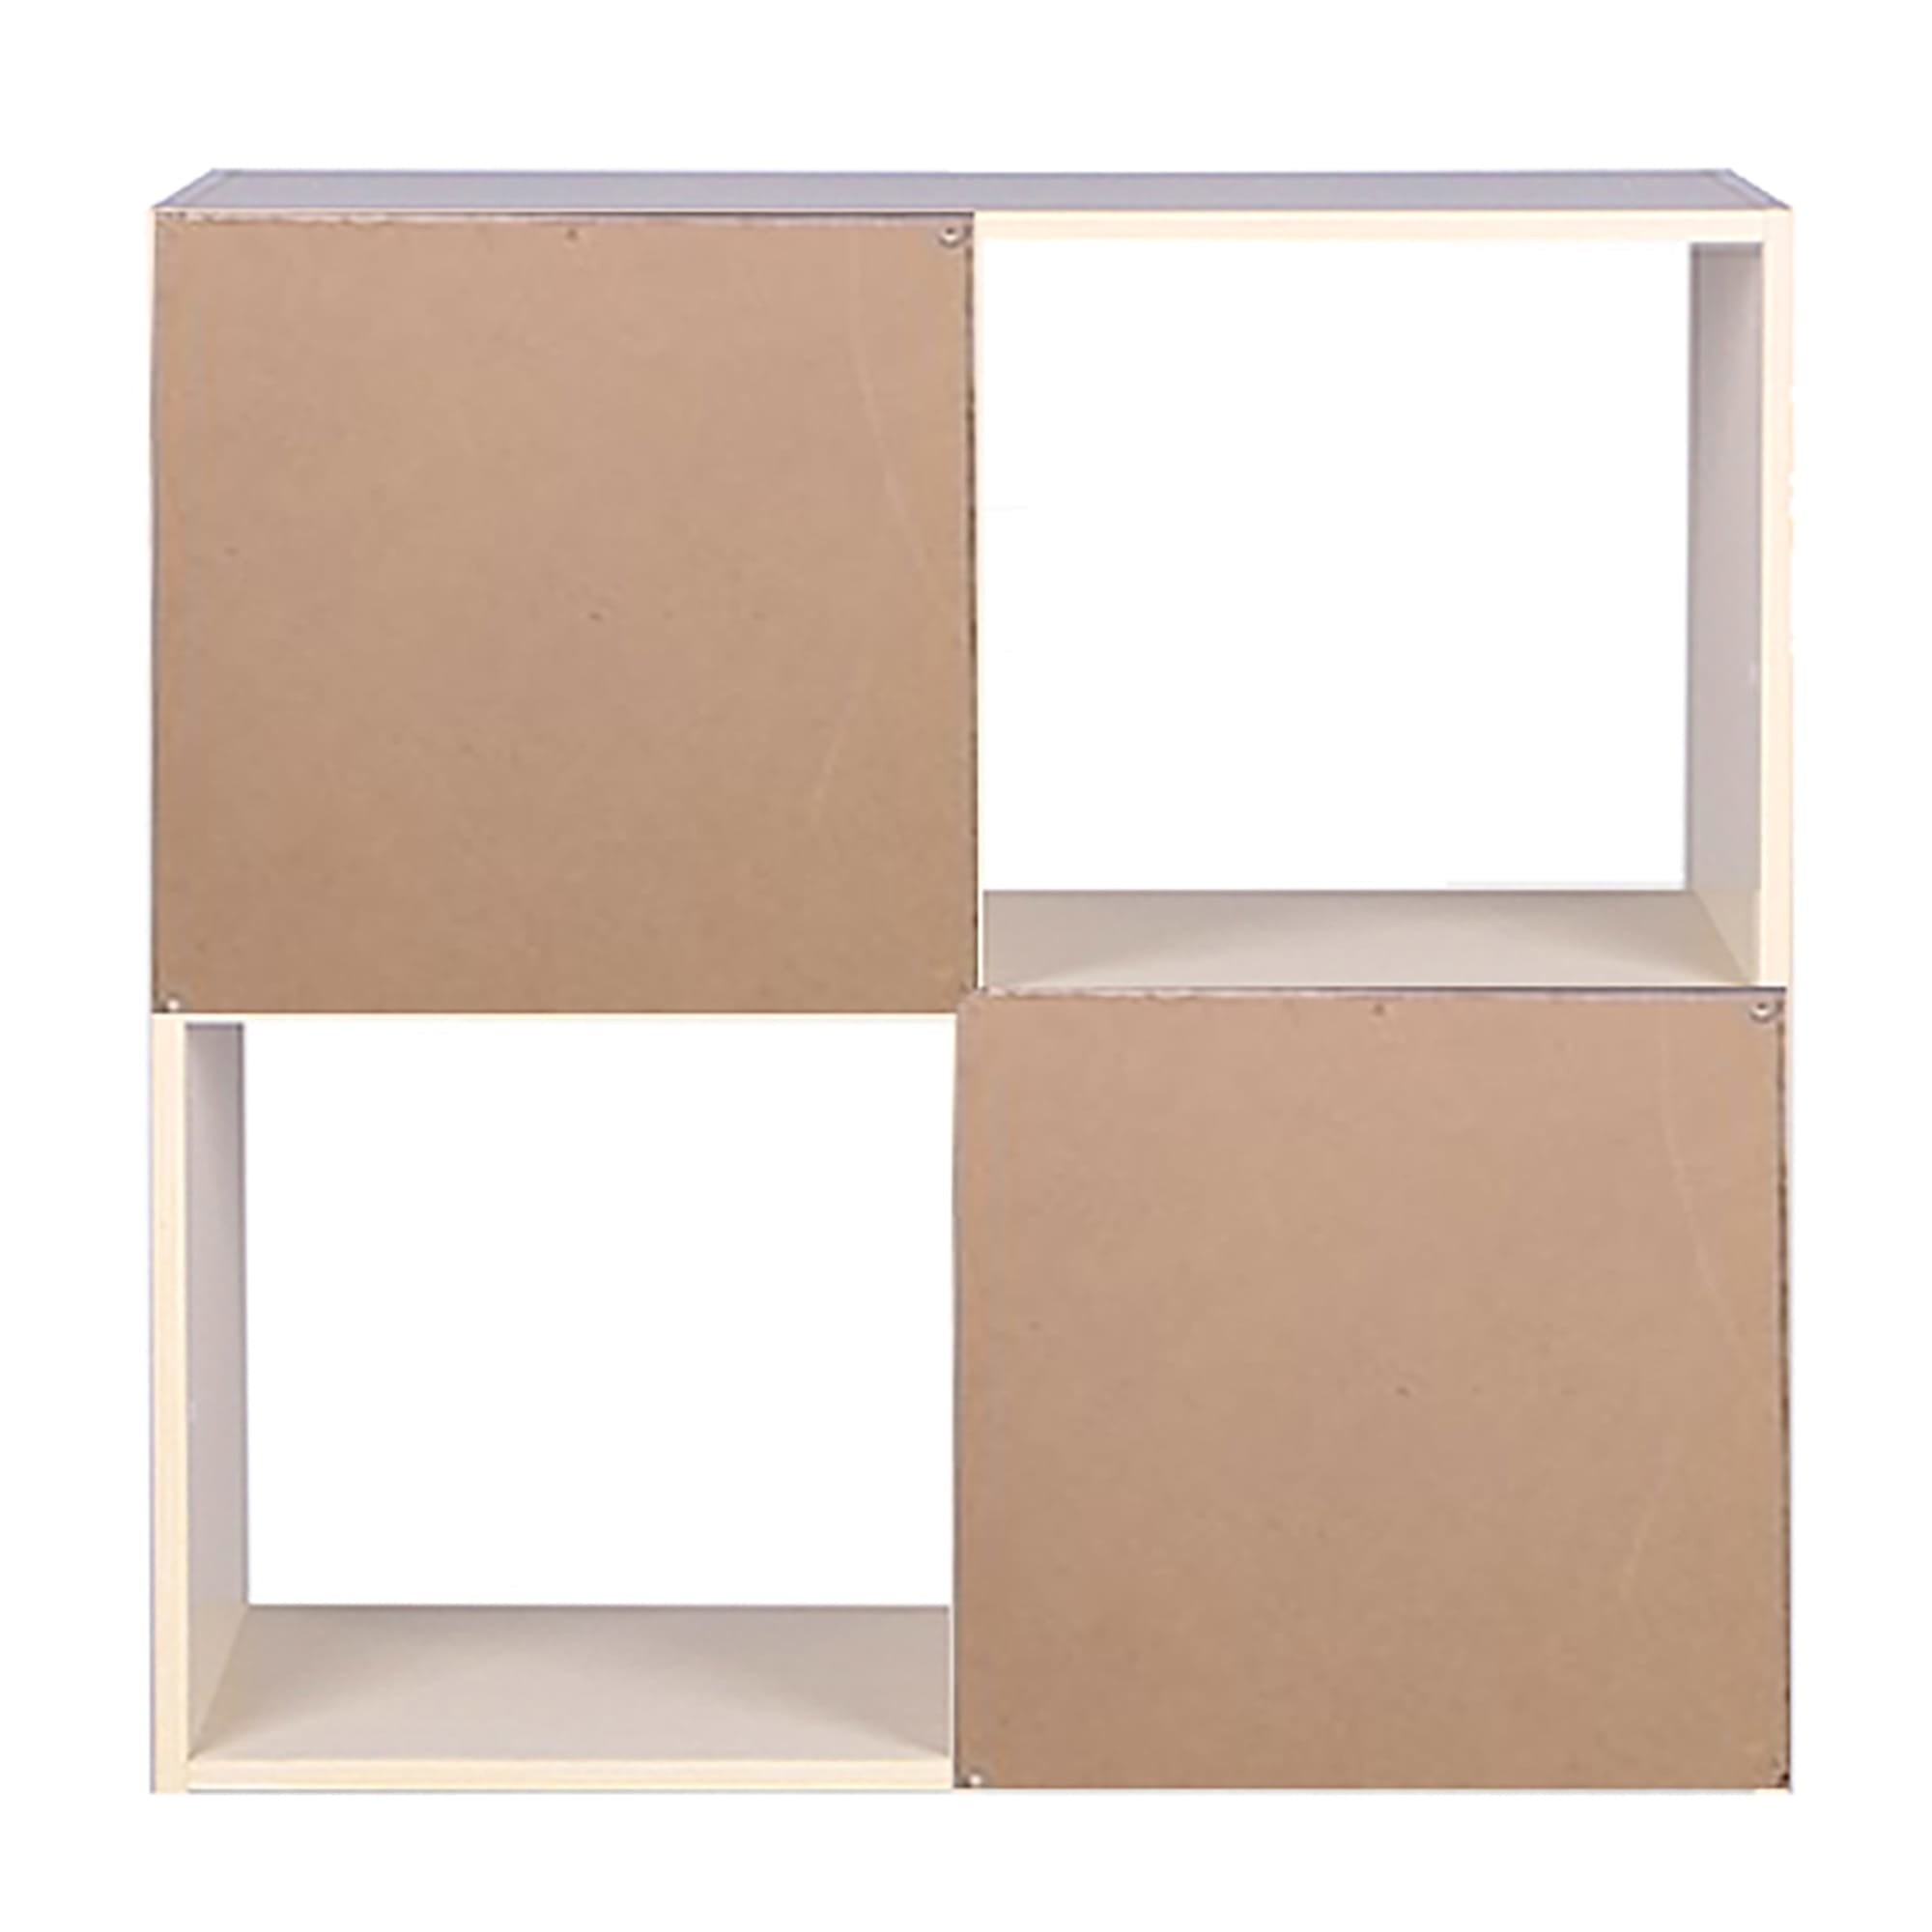 Home Basics Open and Enclosed 4 Cube MDF Storage Organizer, Oak $30.00 EACH, CASE PACK OF 1